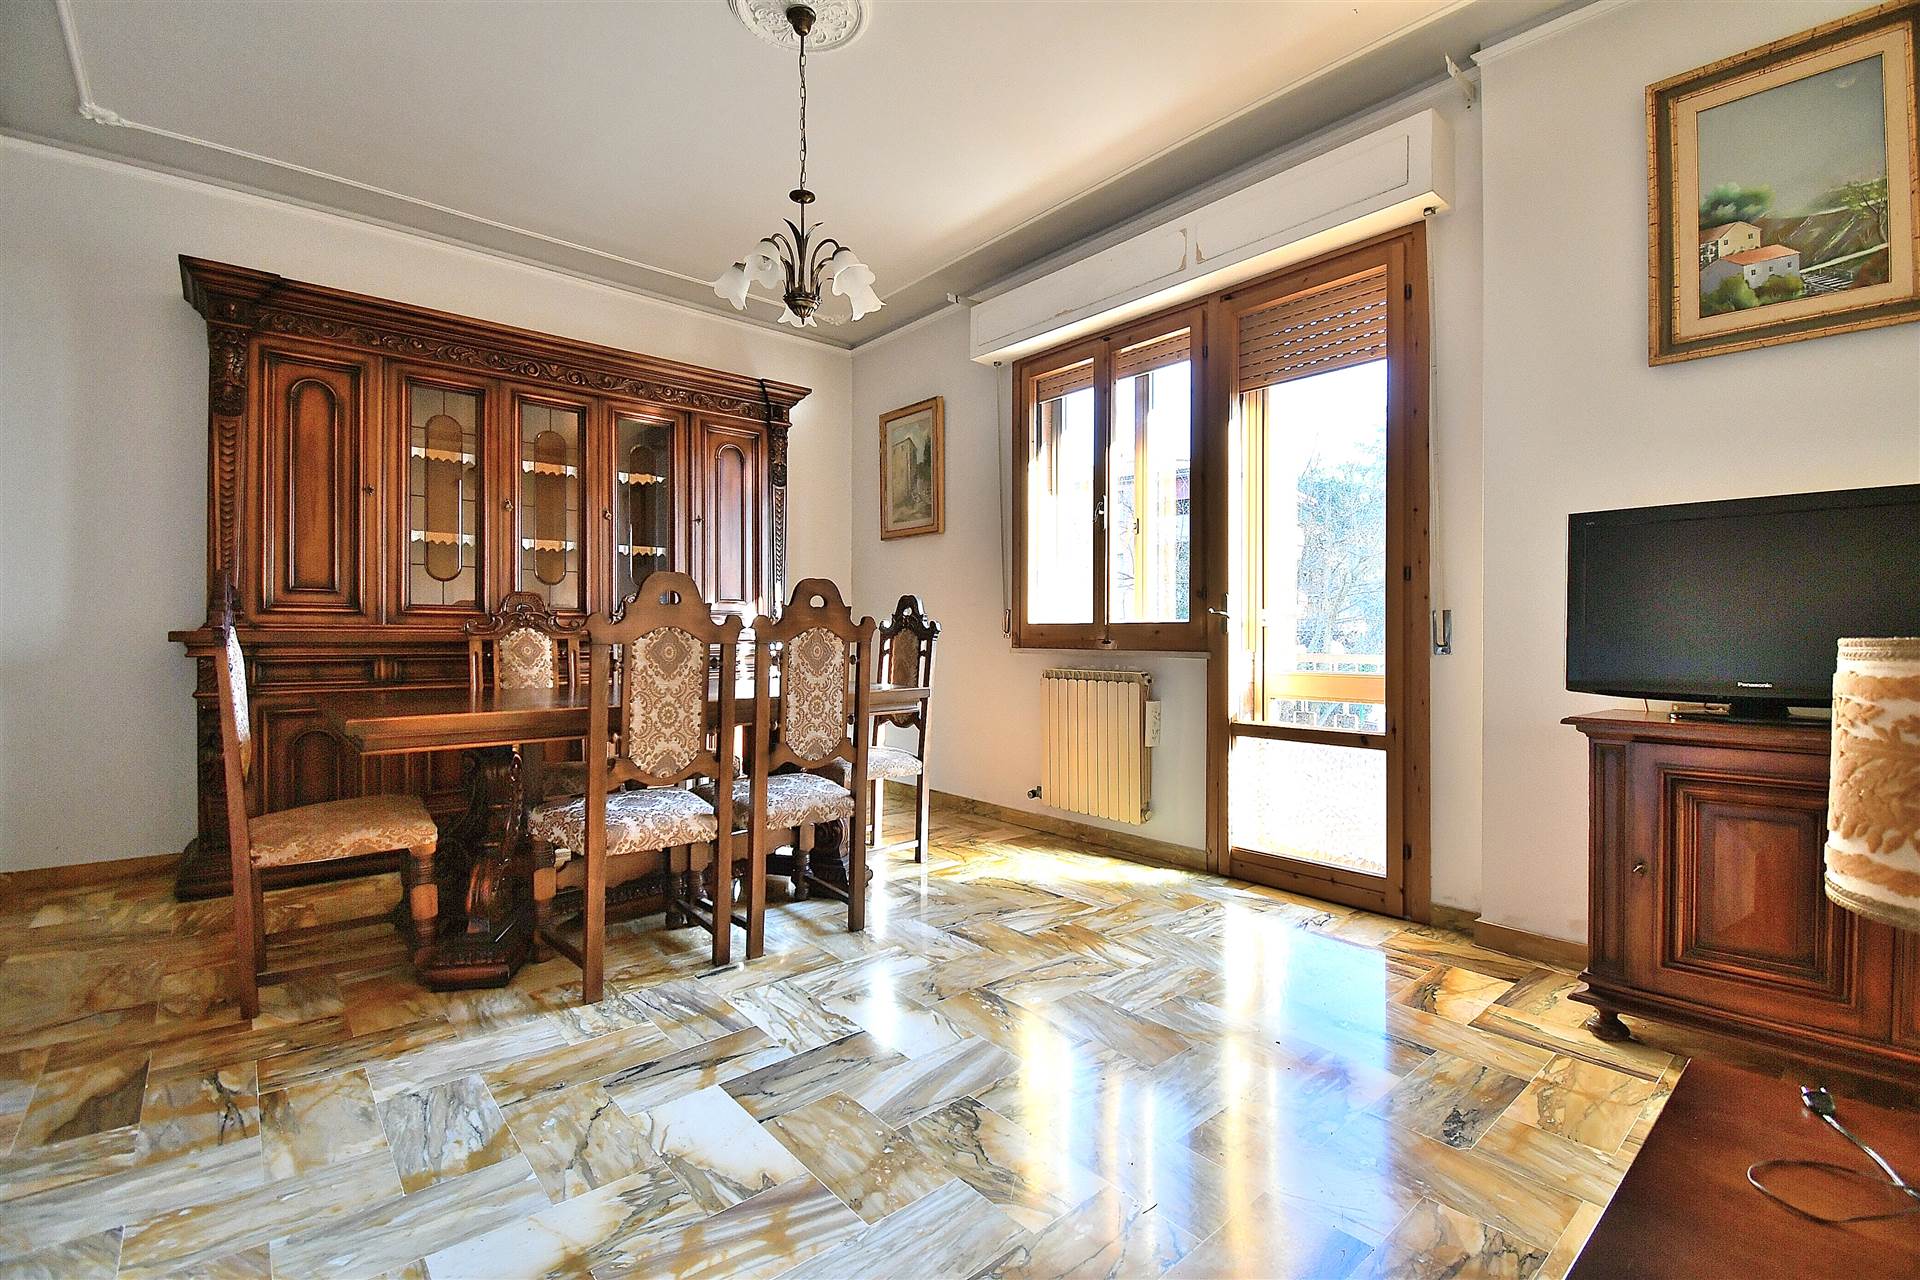 ACQUACALDA, SIENA, Apartment for sale of 129 Sq. mt., Habitable, Heating Individual heating system, Energetic class: G, Epi: 175 kwh/m2 year, placed at 1° on 5, composed by: 5 Rooms, Separate kitchen,